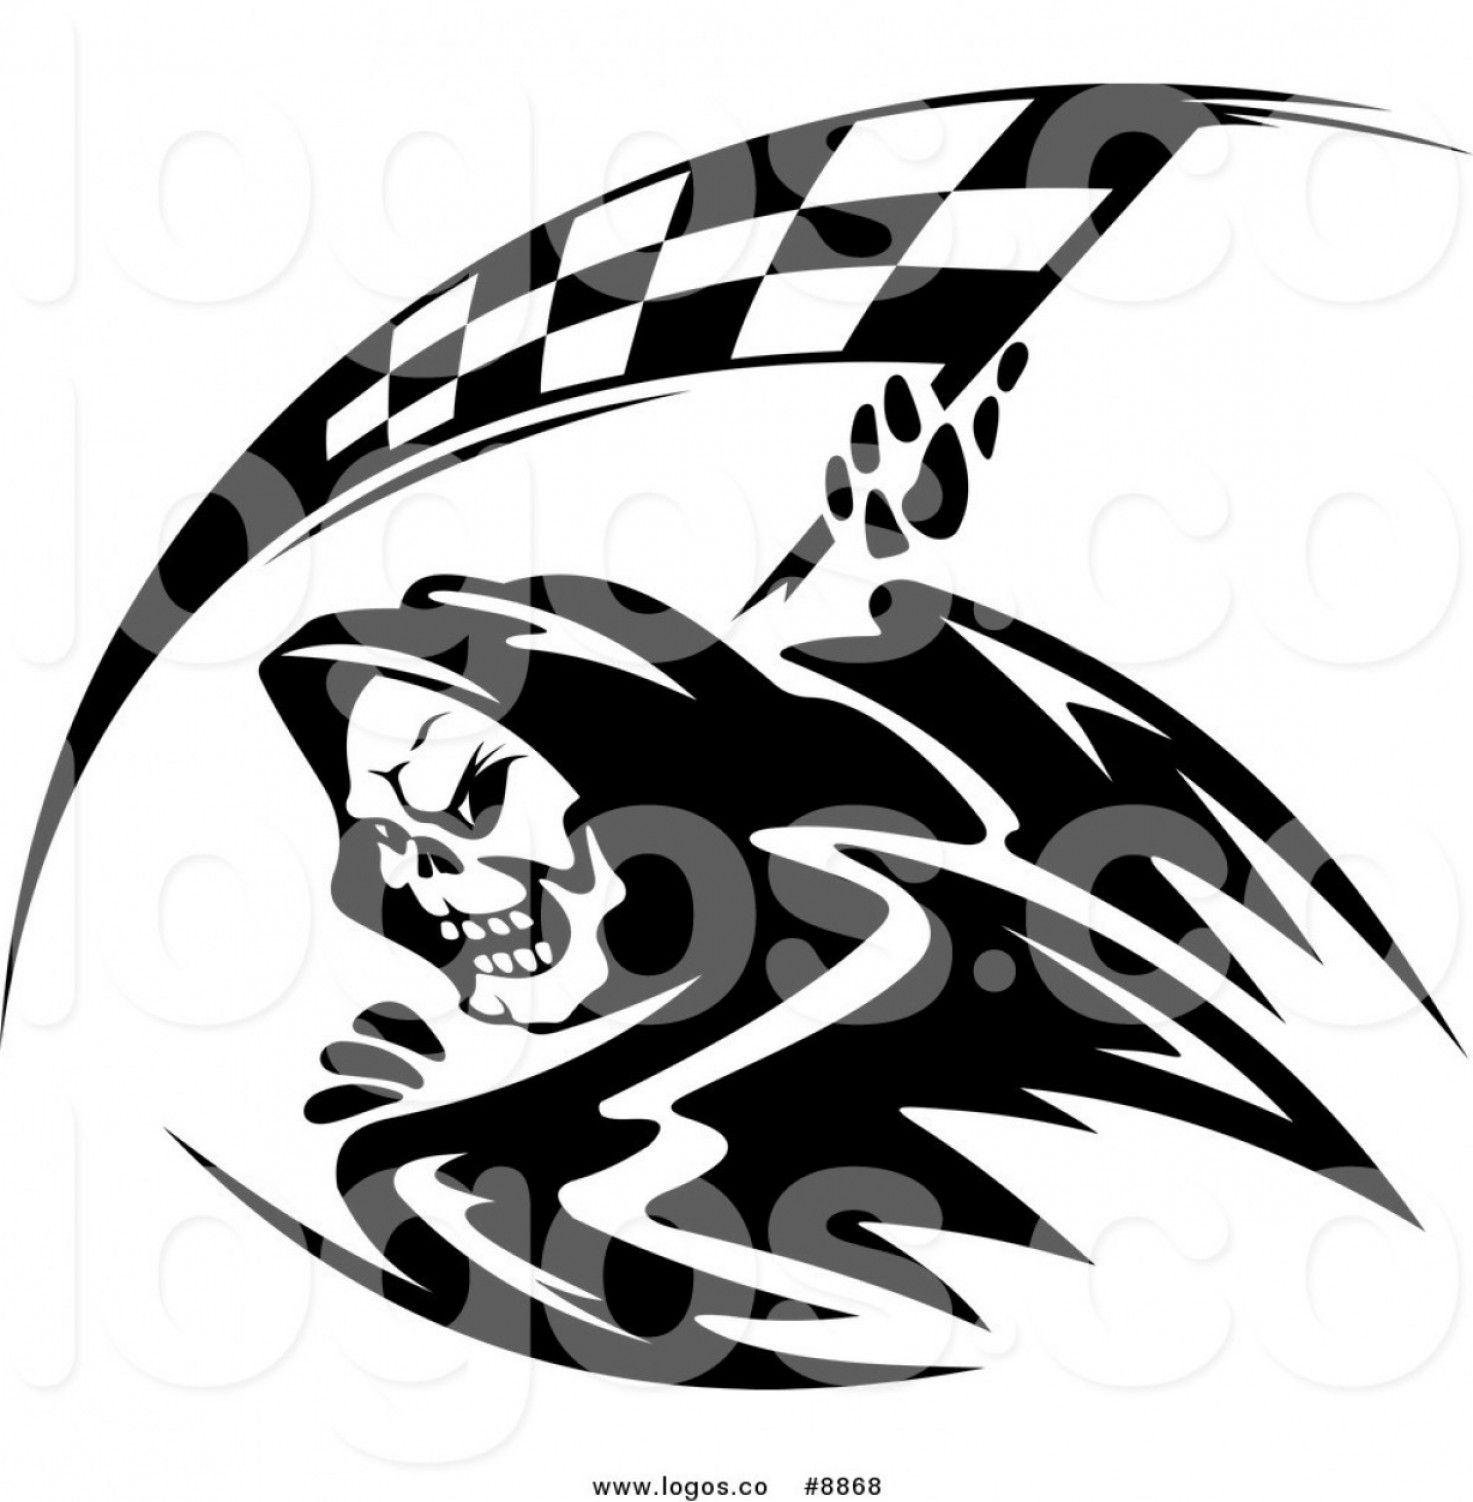 Black and White Checkered Logo - Royalty Free Clip Art Vector Logo Of A Grim Reaper With A Black And ...